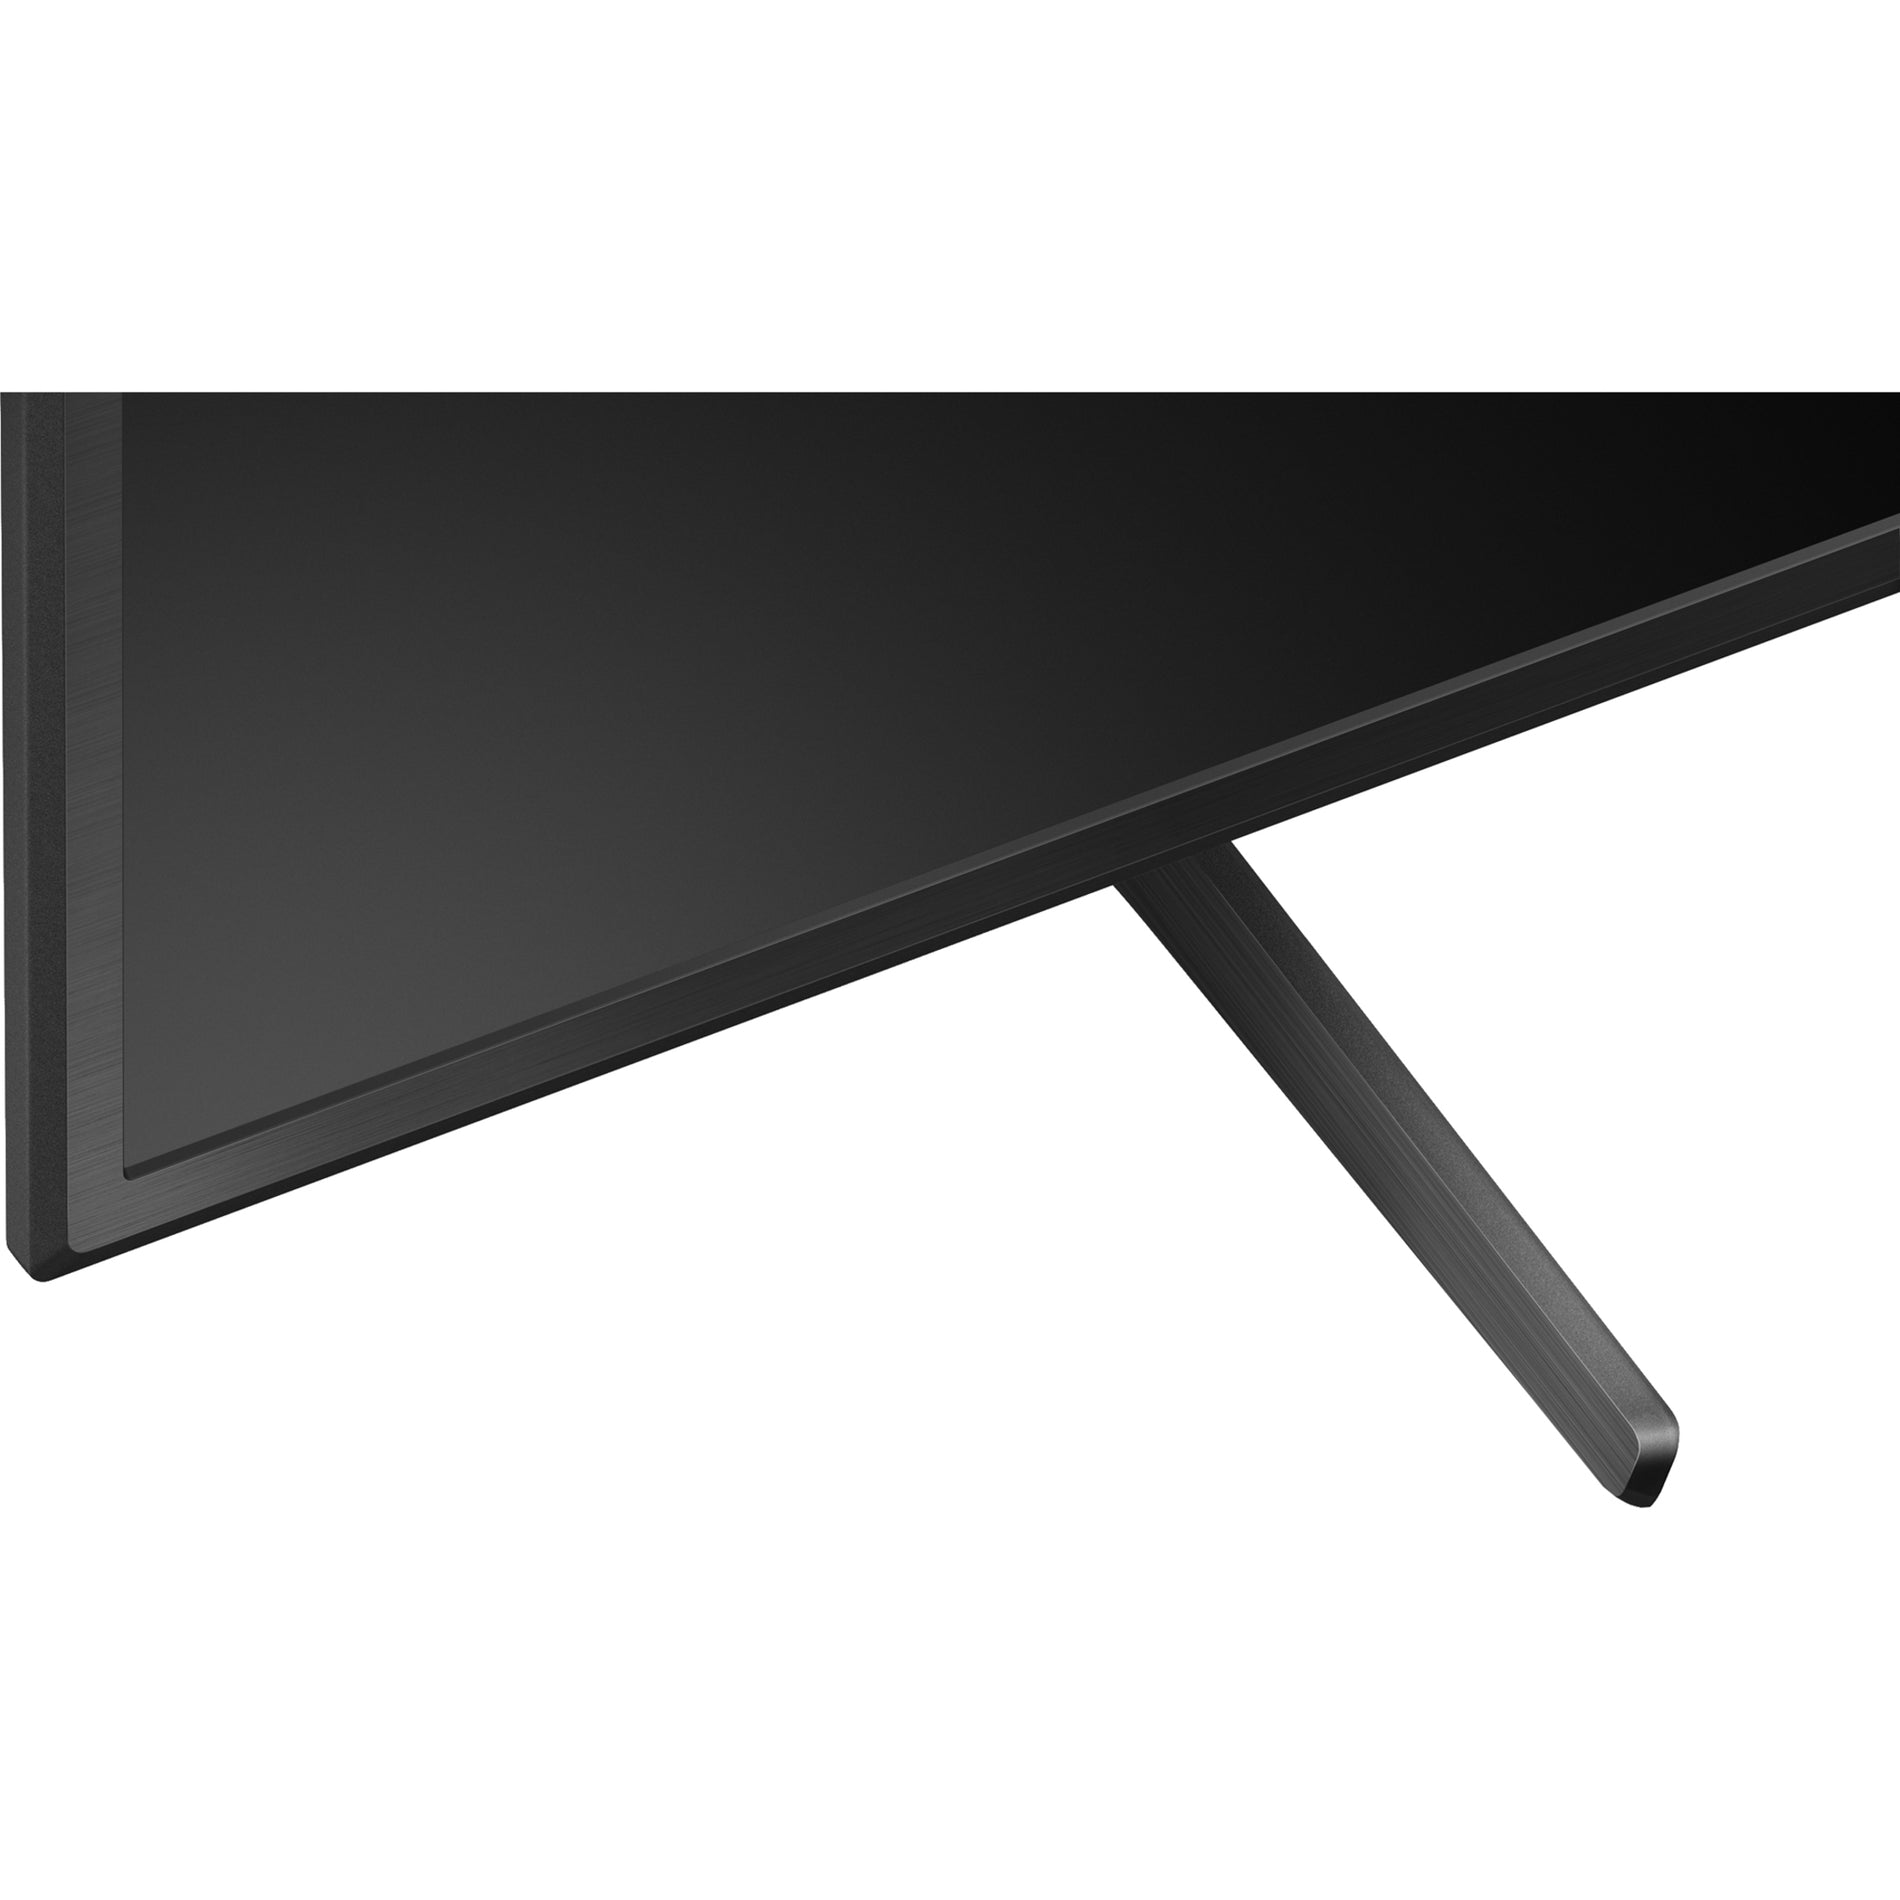 Sony Pro FW43BZ30J 43-inch BRAVIA 4K Ultra HD HDR Professional Display, Android 10, 3 Year Warranty, Energy Star, USB, HDMI, Serial, 440 Nit, 2160p, 400,000:1 Dynamic Contrast Ratio